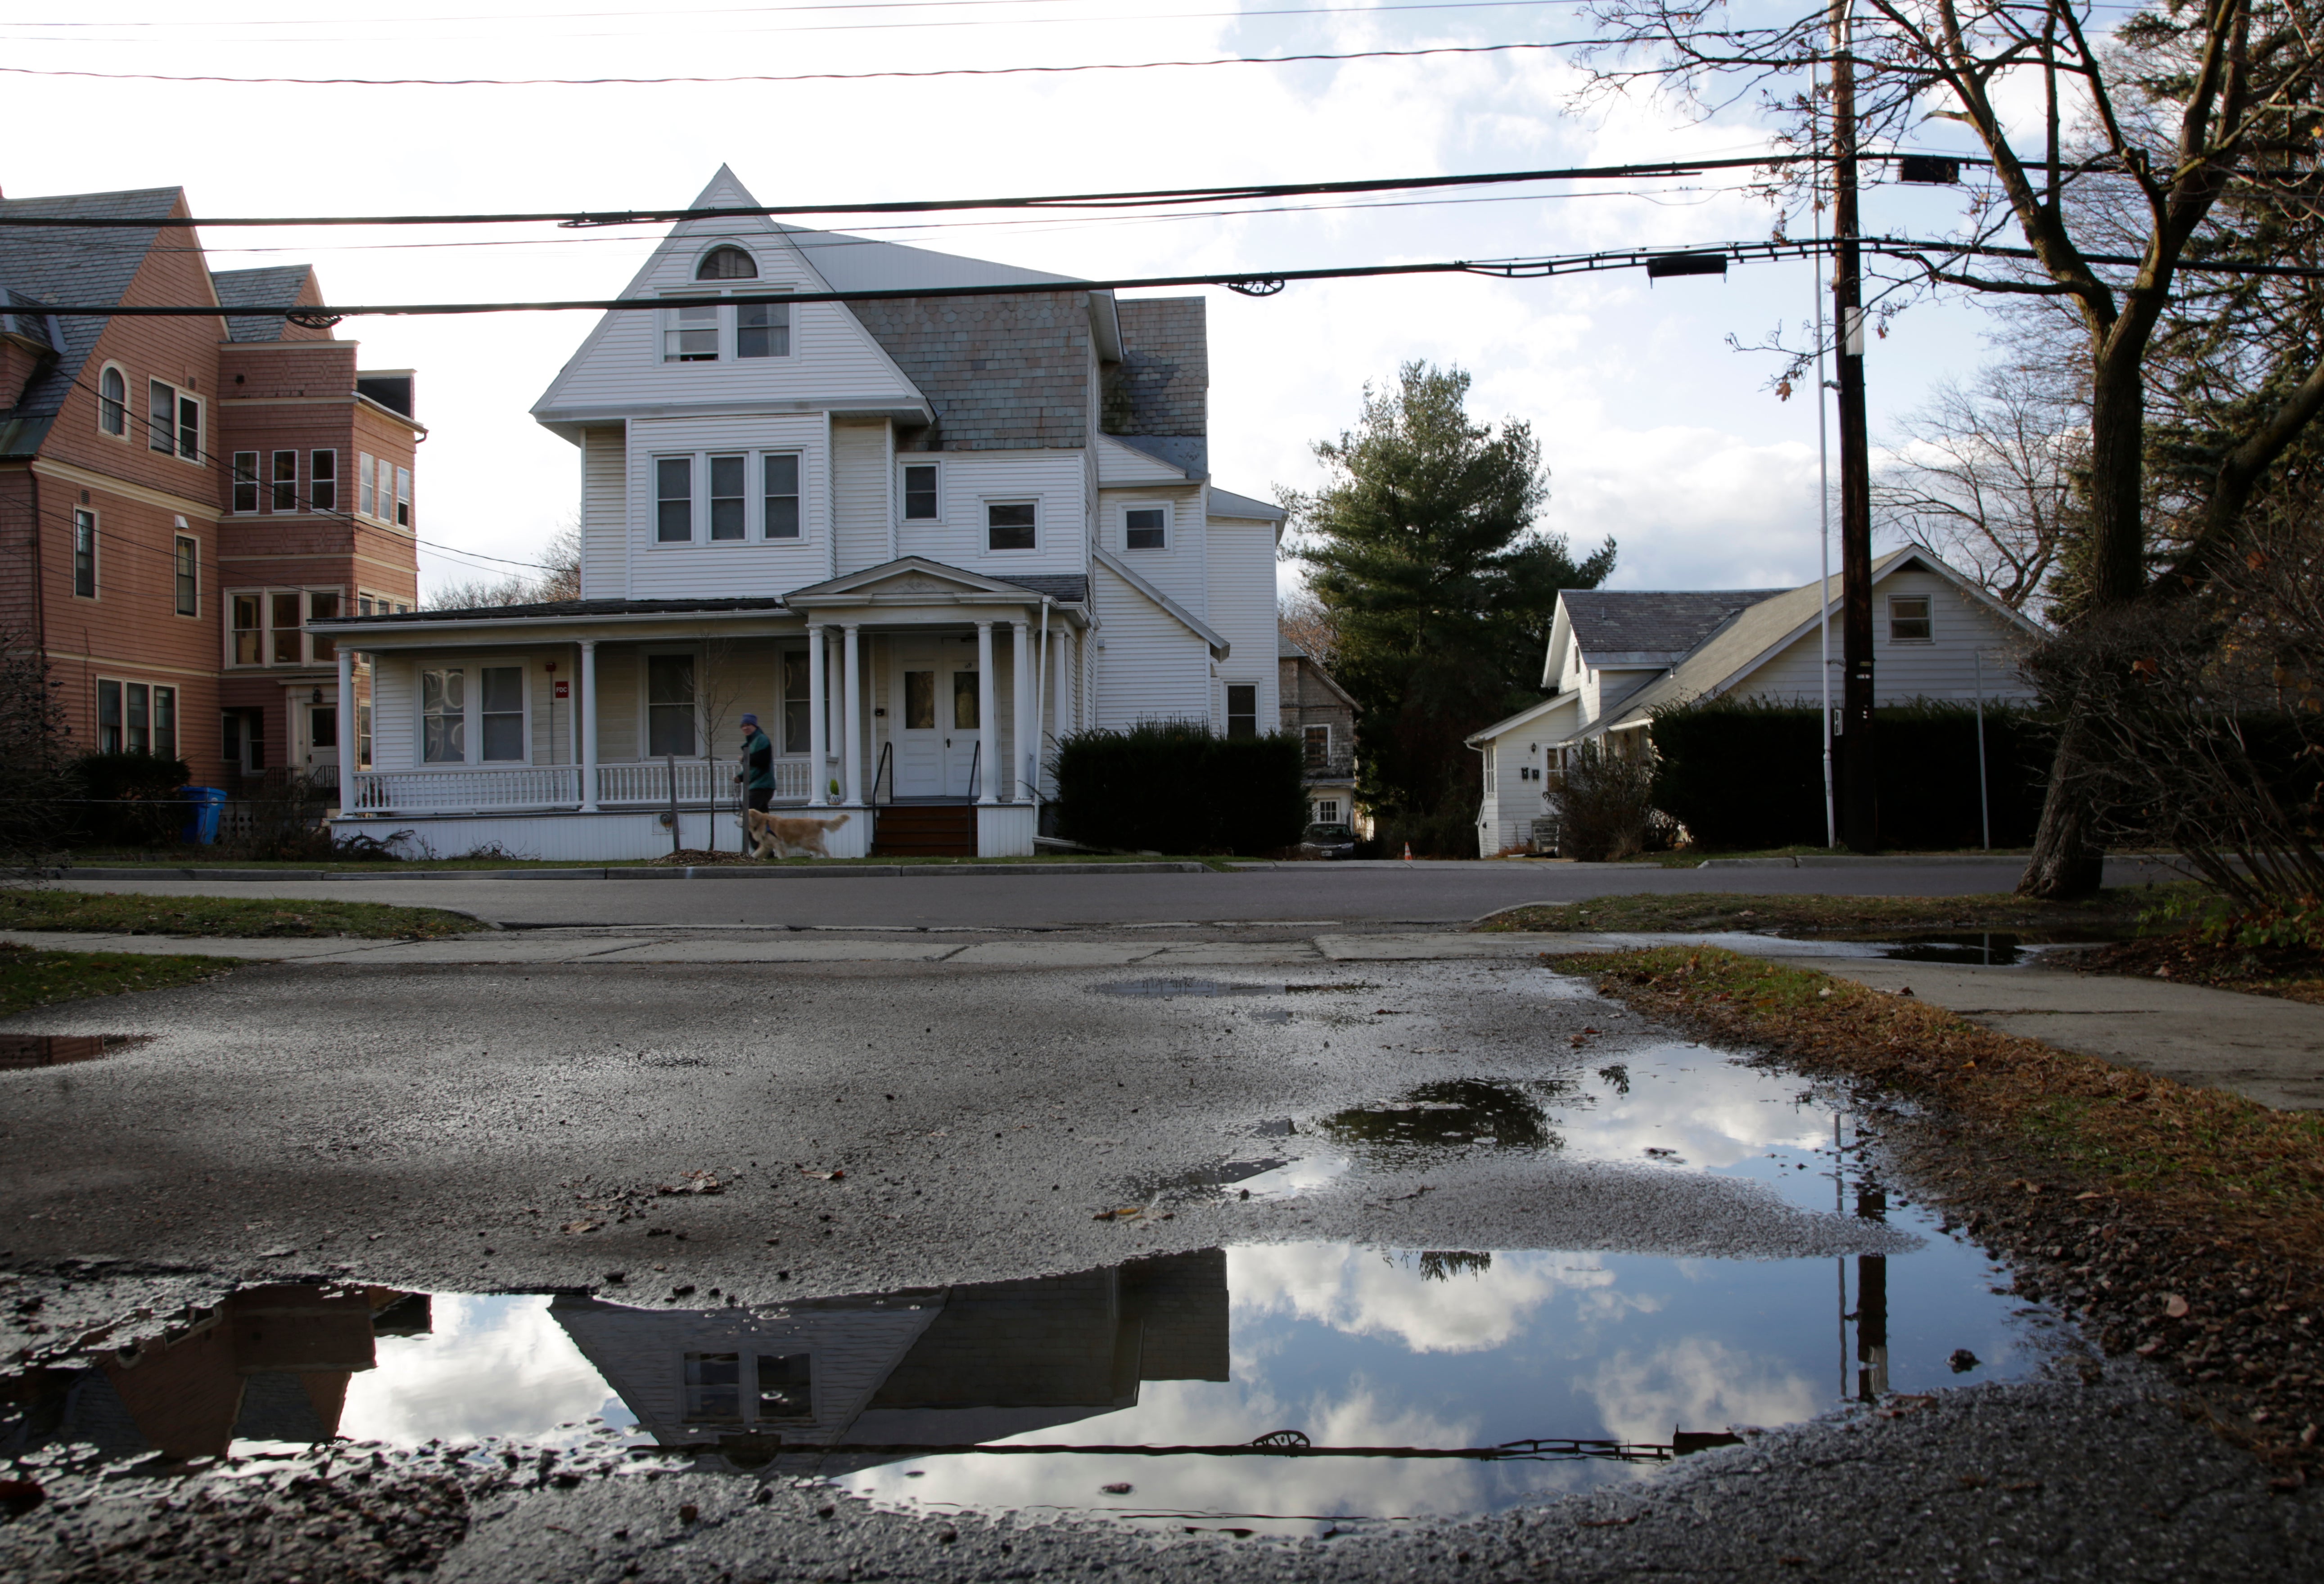 The house in Burlington, Vermont where police identified and arrested Mr Eaton on Sunday.